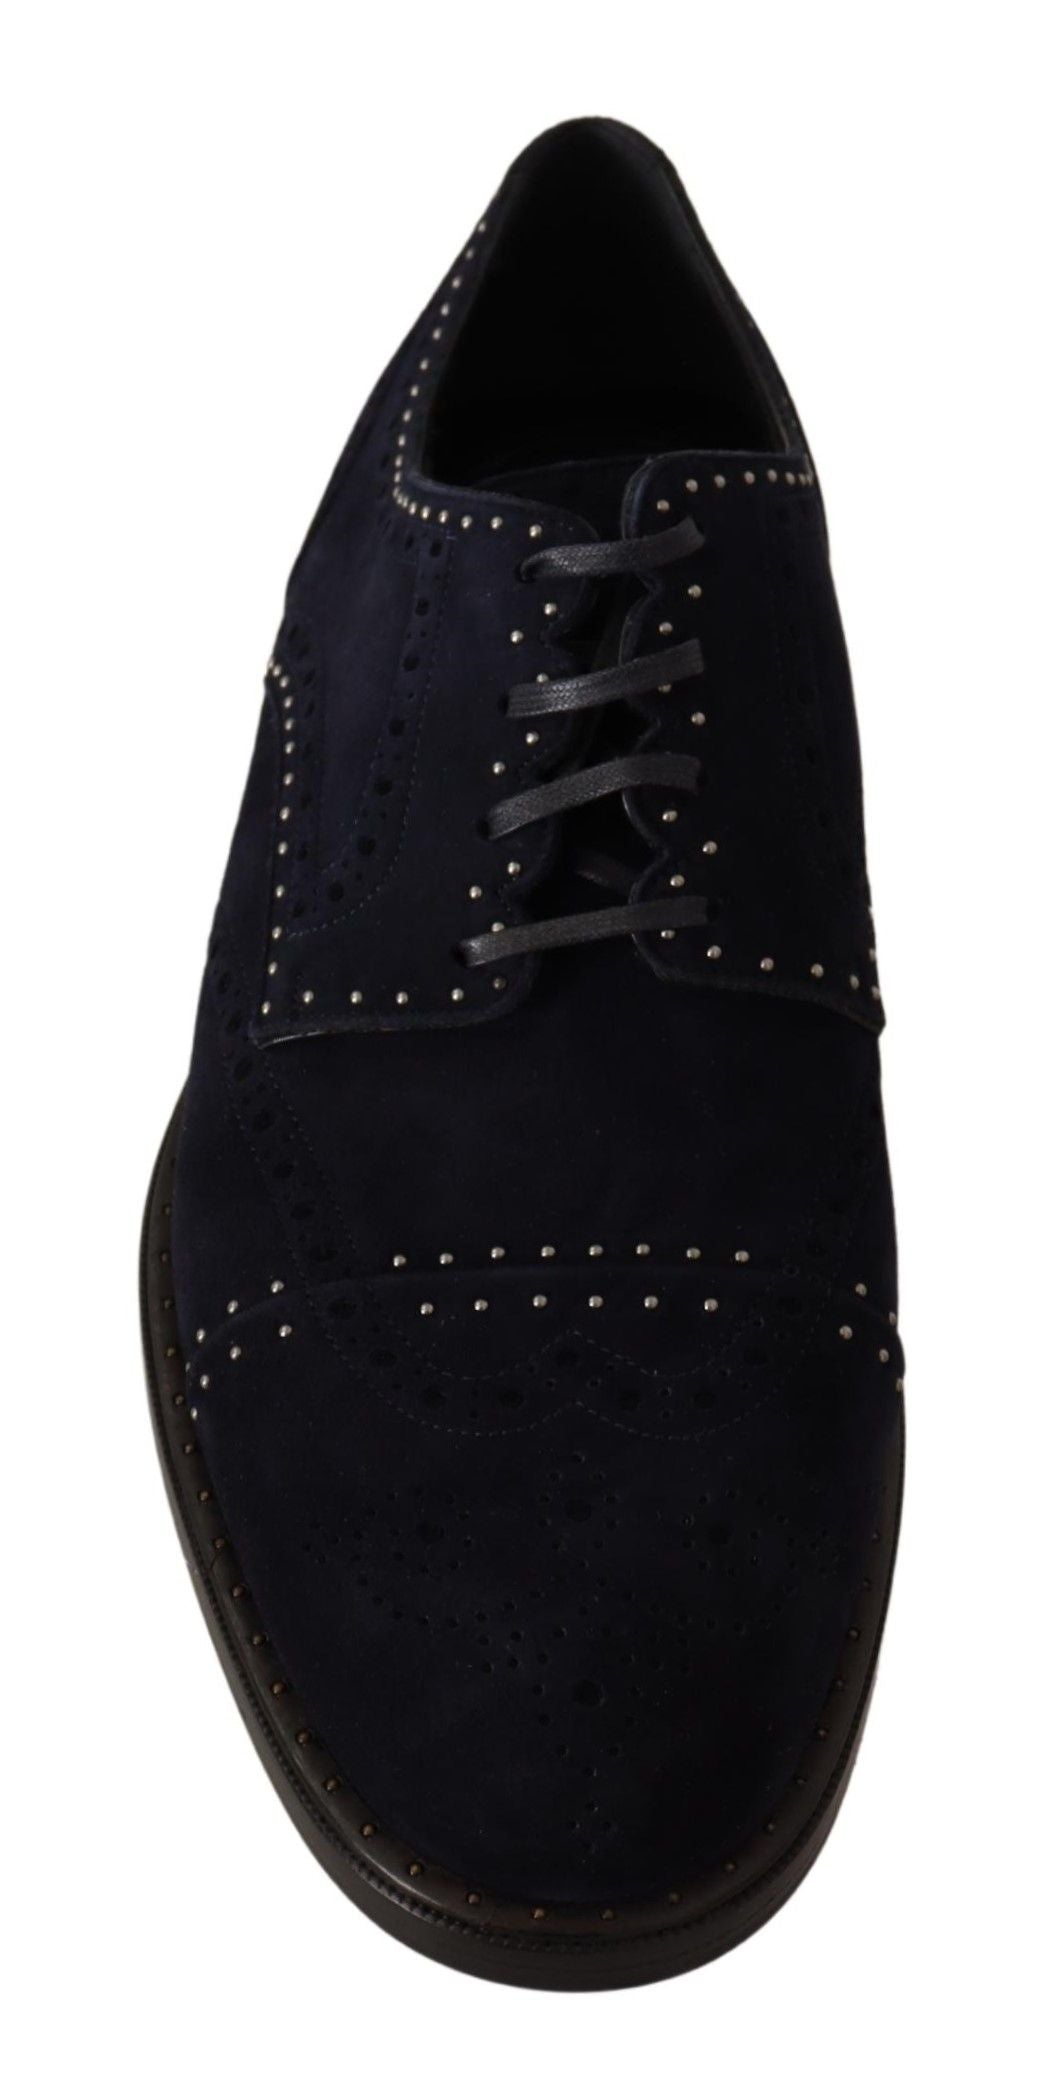 Dolce & Gabbana Blue Suede Leather Derby Shoted Shoes